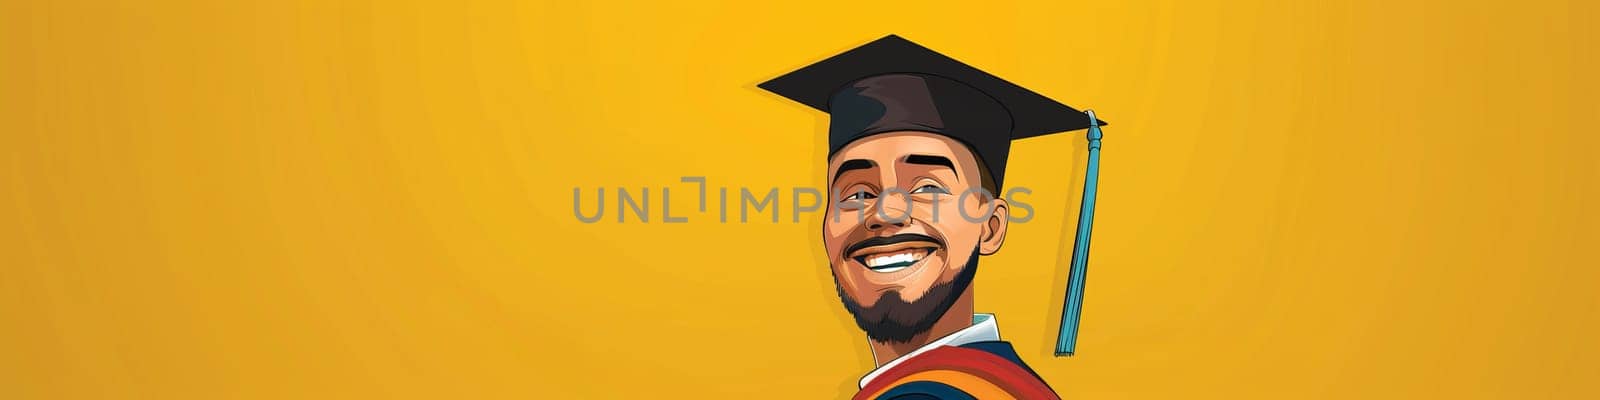 Portrait of smiling and laughing an university collage man student isolated on yellow background with copy space